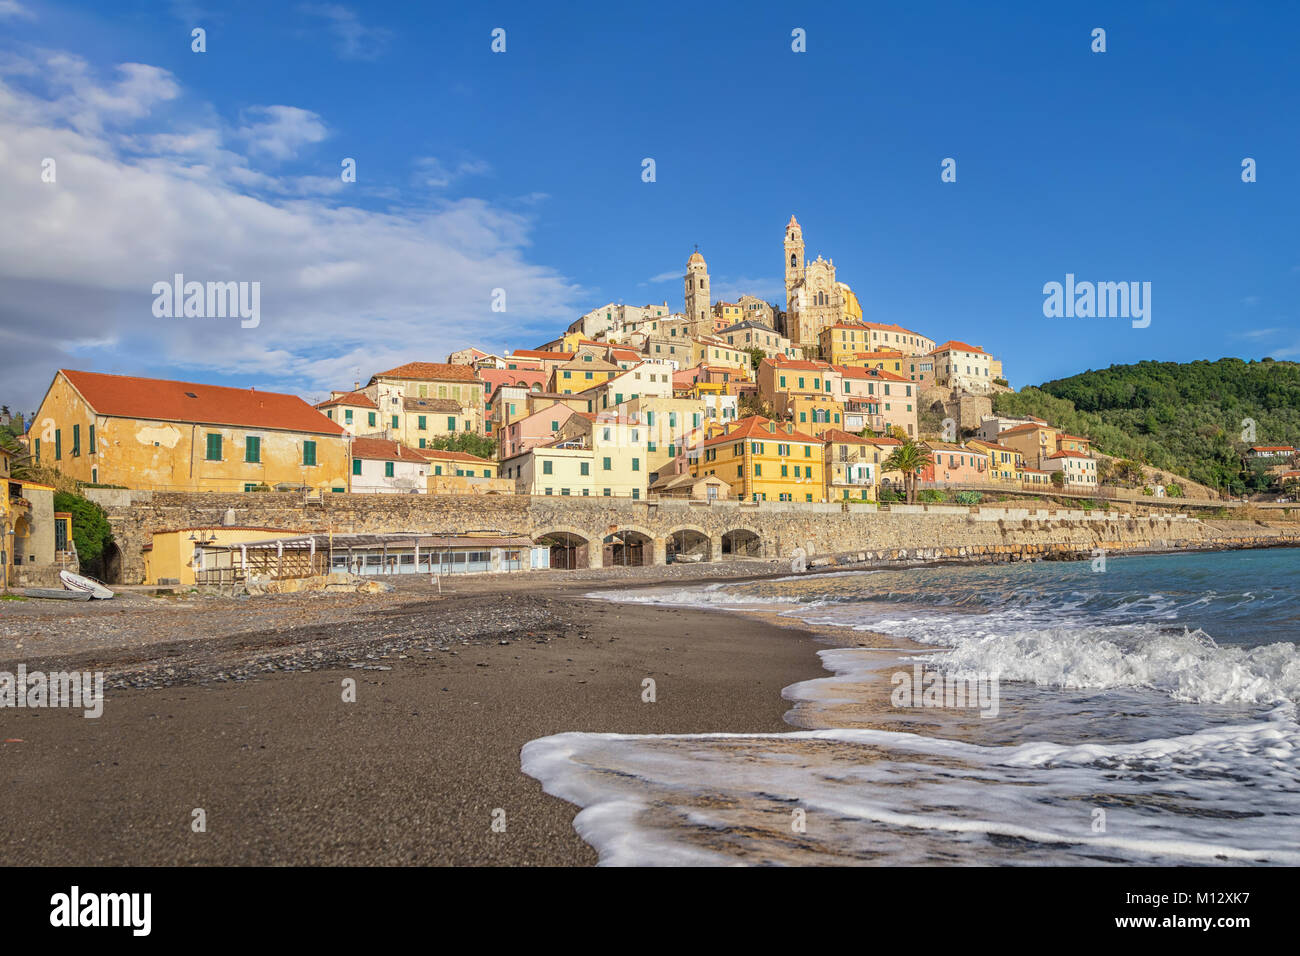 View of Cervo town from the beach, Province of Imperia, Liguria, Italy Stock Photo